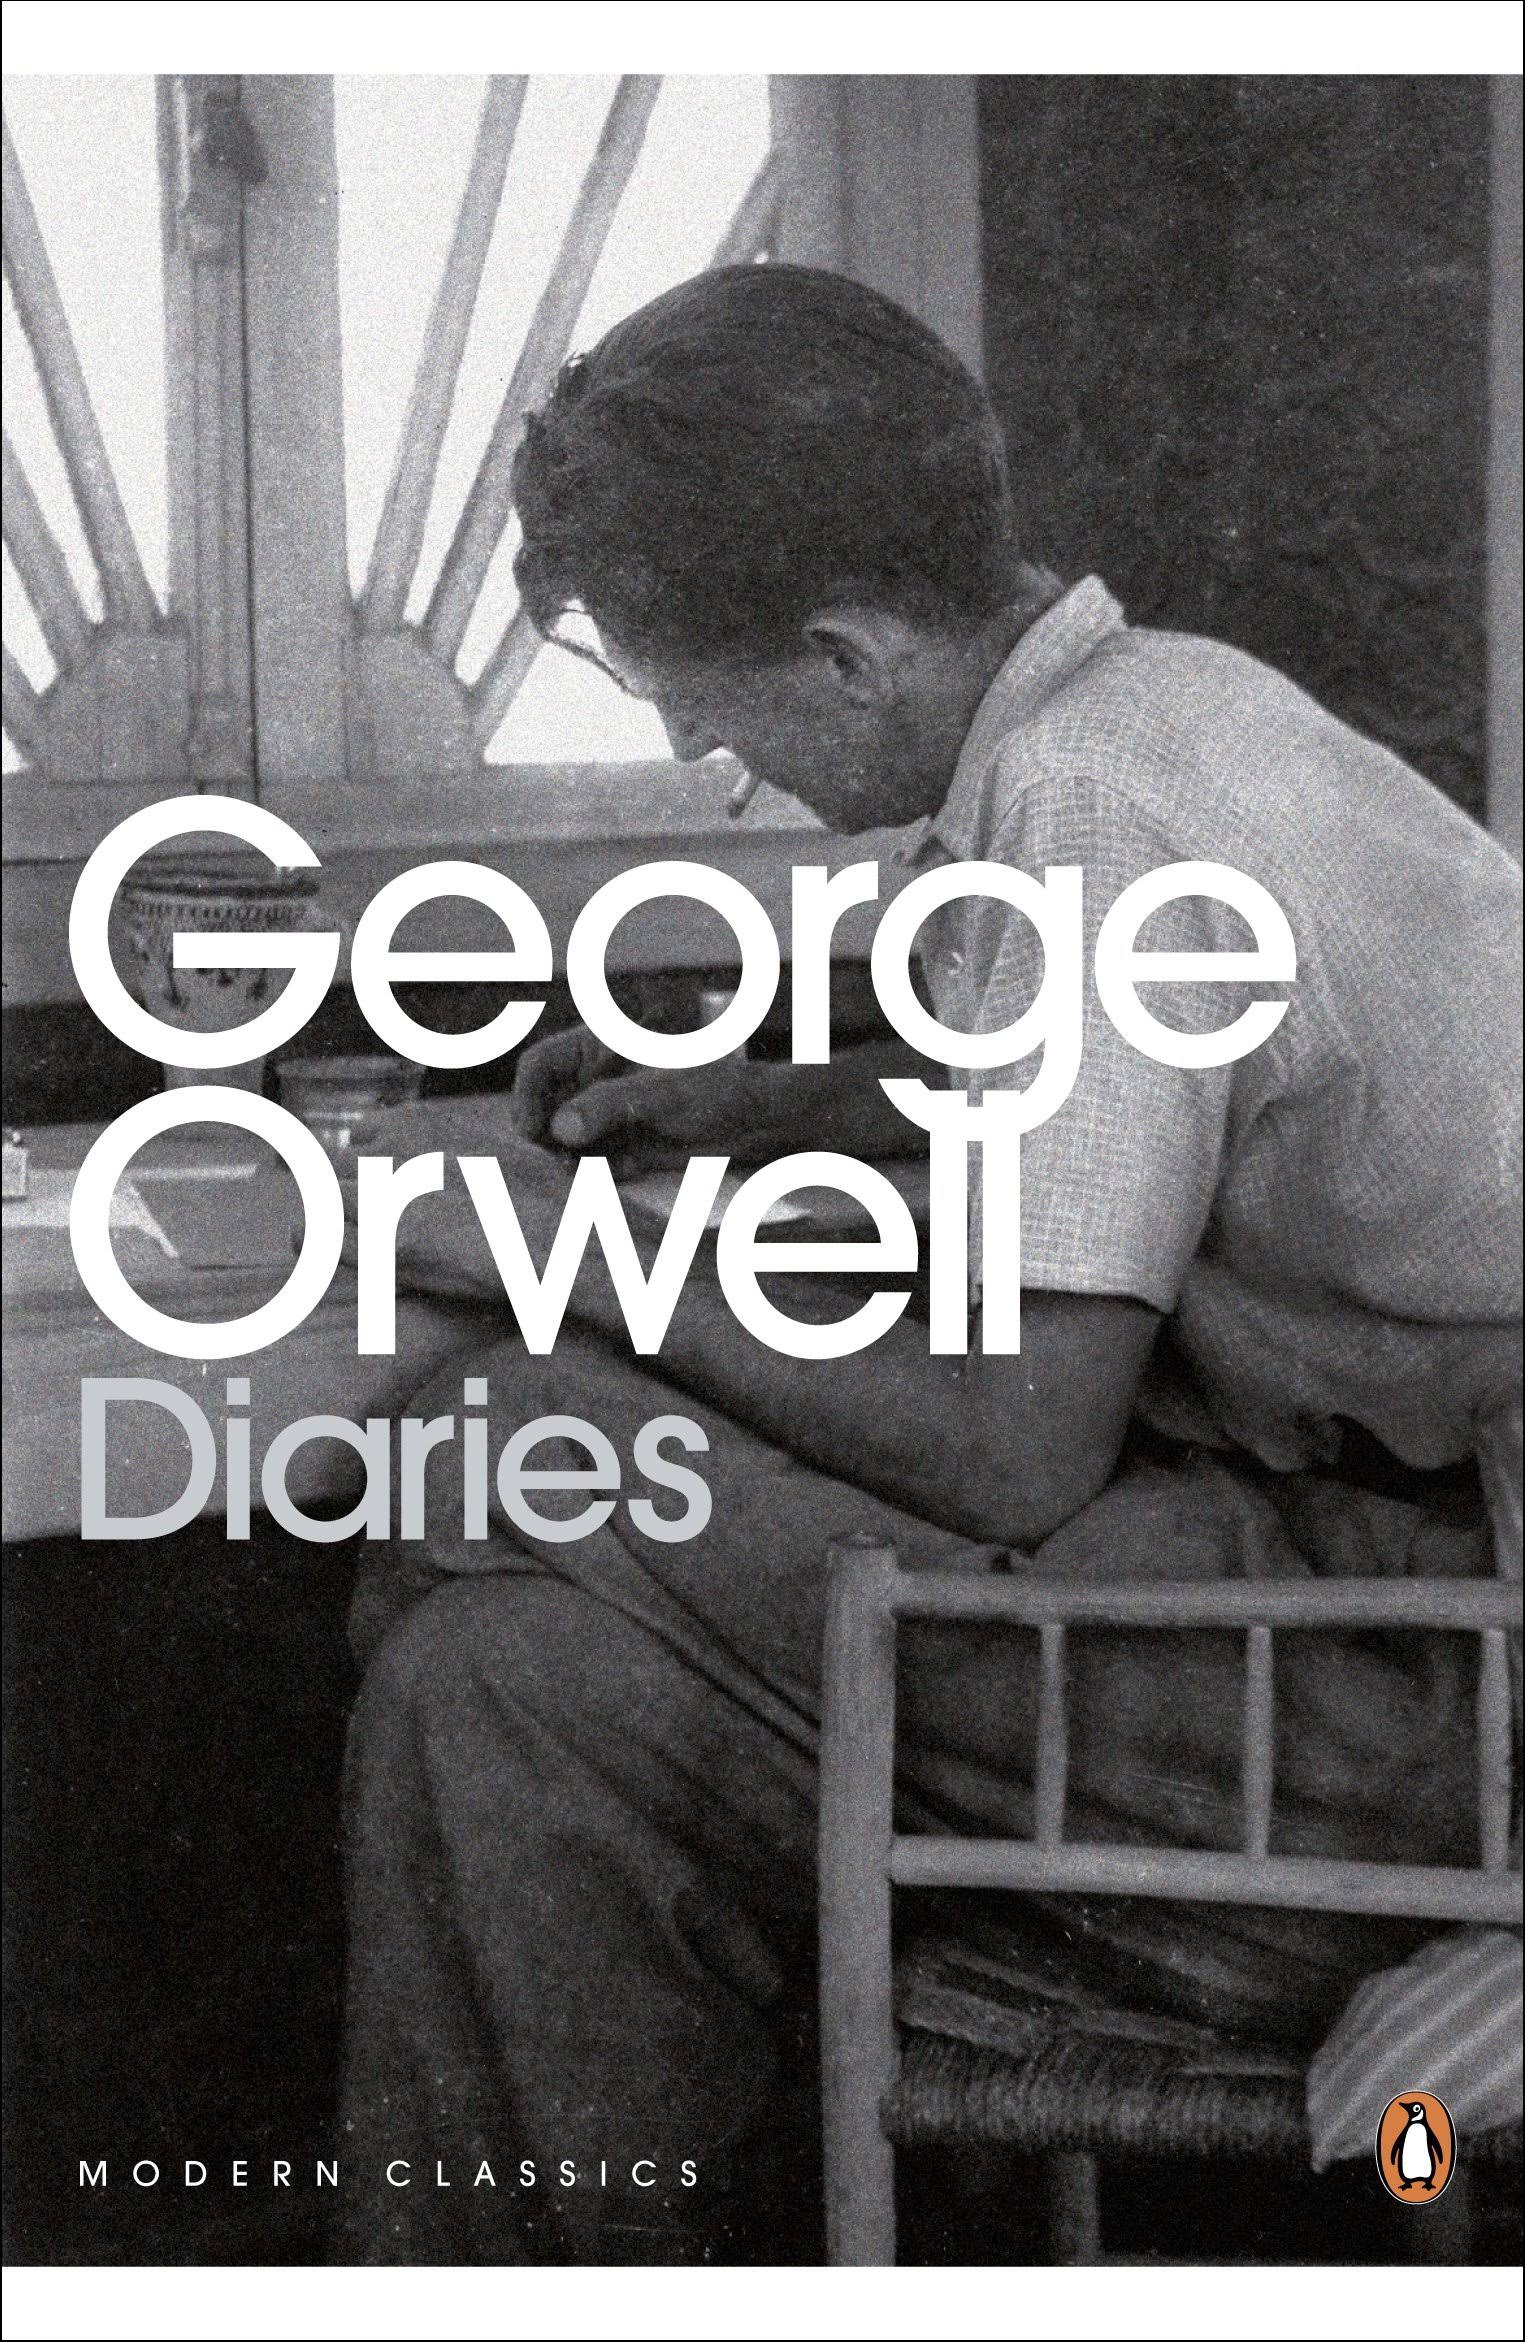 The Orwell Diaries (Penguin Modern Classics) by Orwell, George